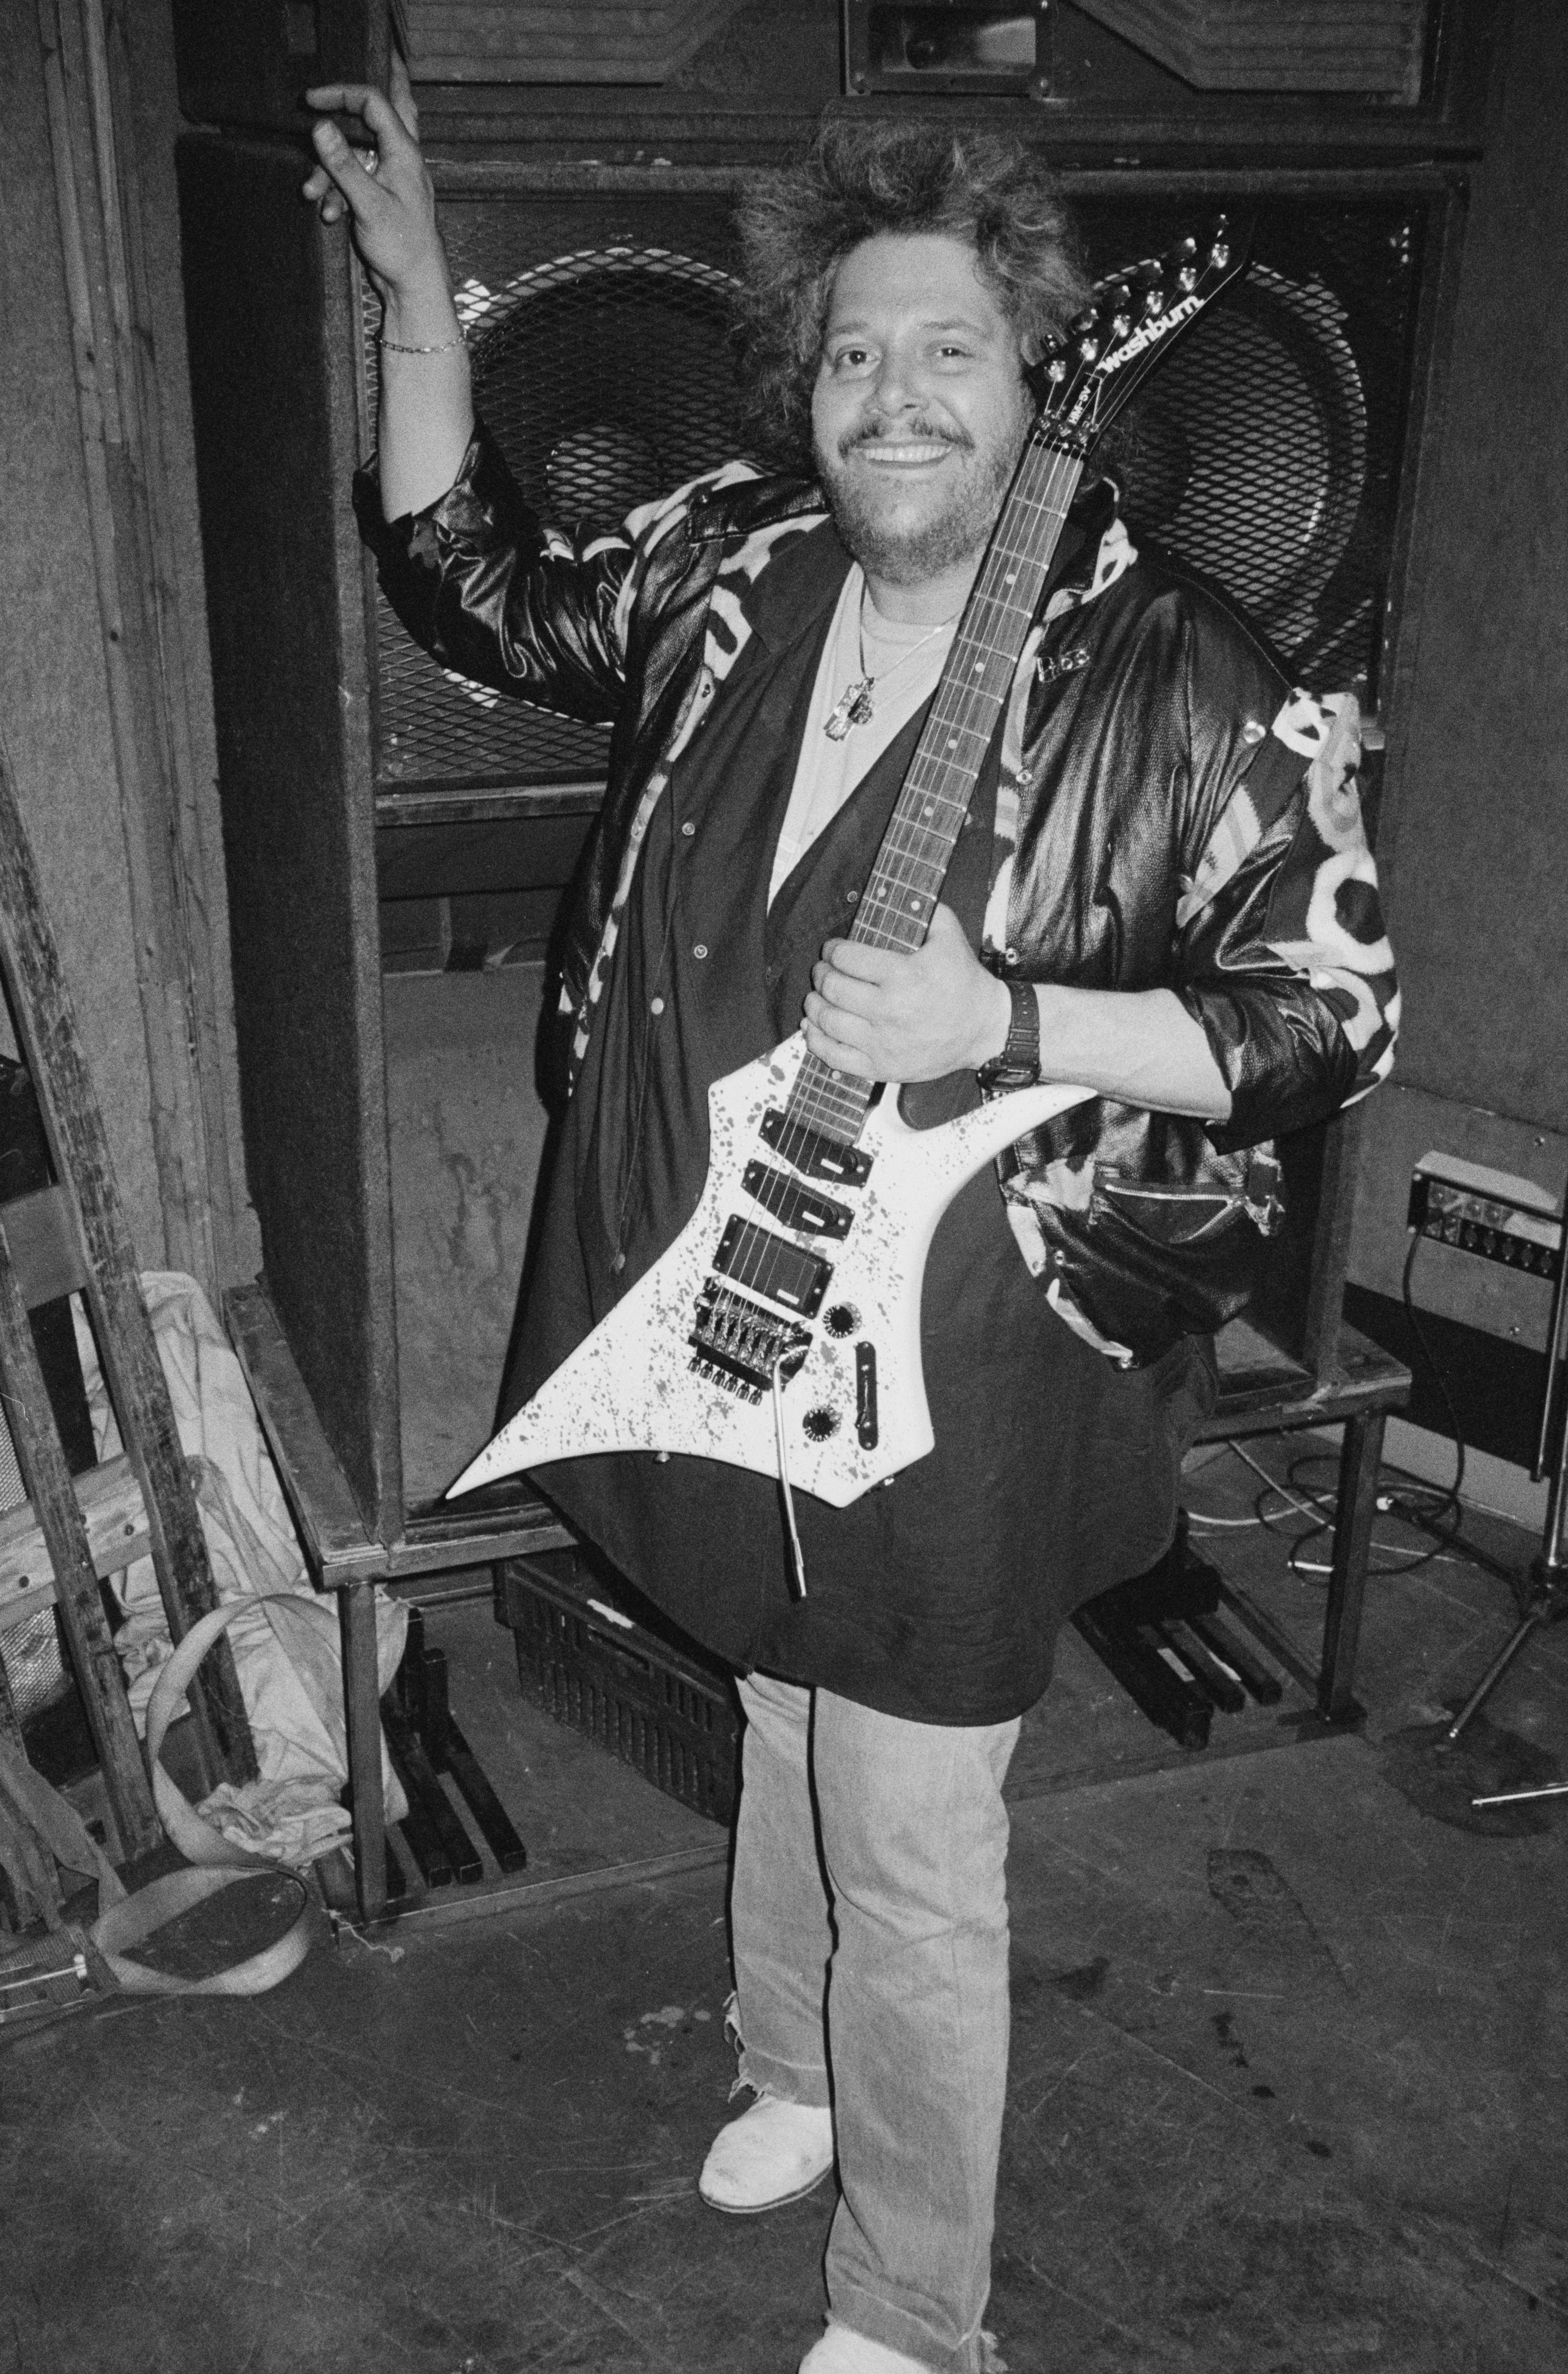 Leslie West of Mountain poses with a Washburn guitar in a rehearsal studio in 1984 in London, United Kingdom | Photo: Erica Echenberg/Redferns/Getty Images